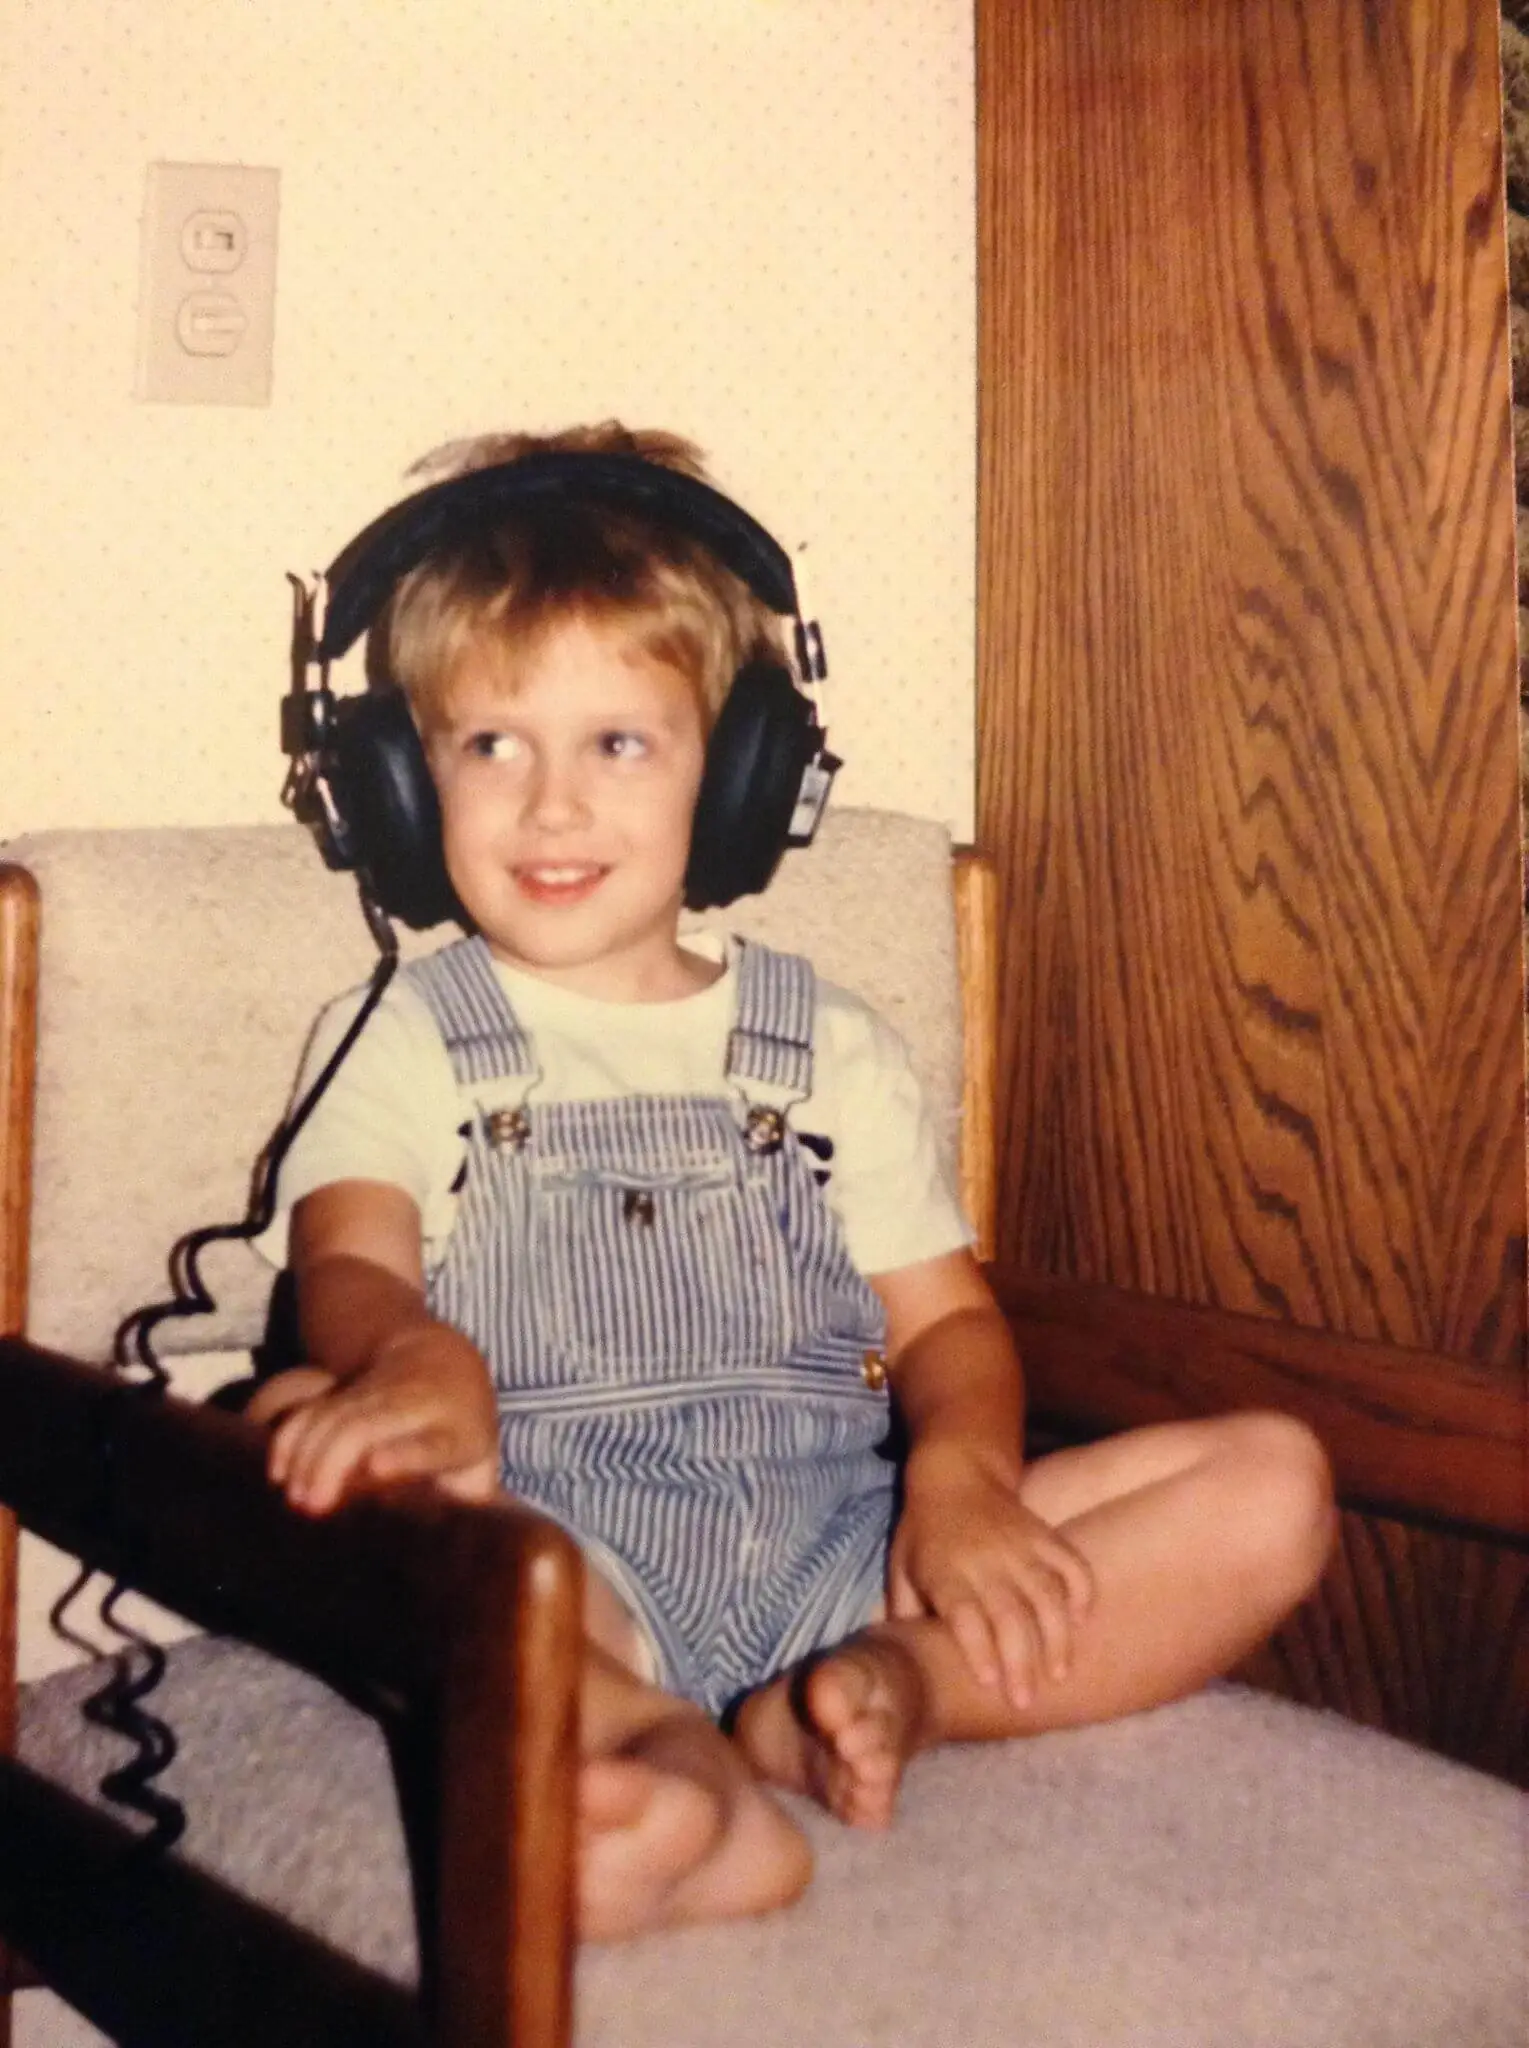 Photo of Dustin as a child with retro headphones